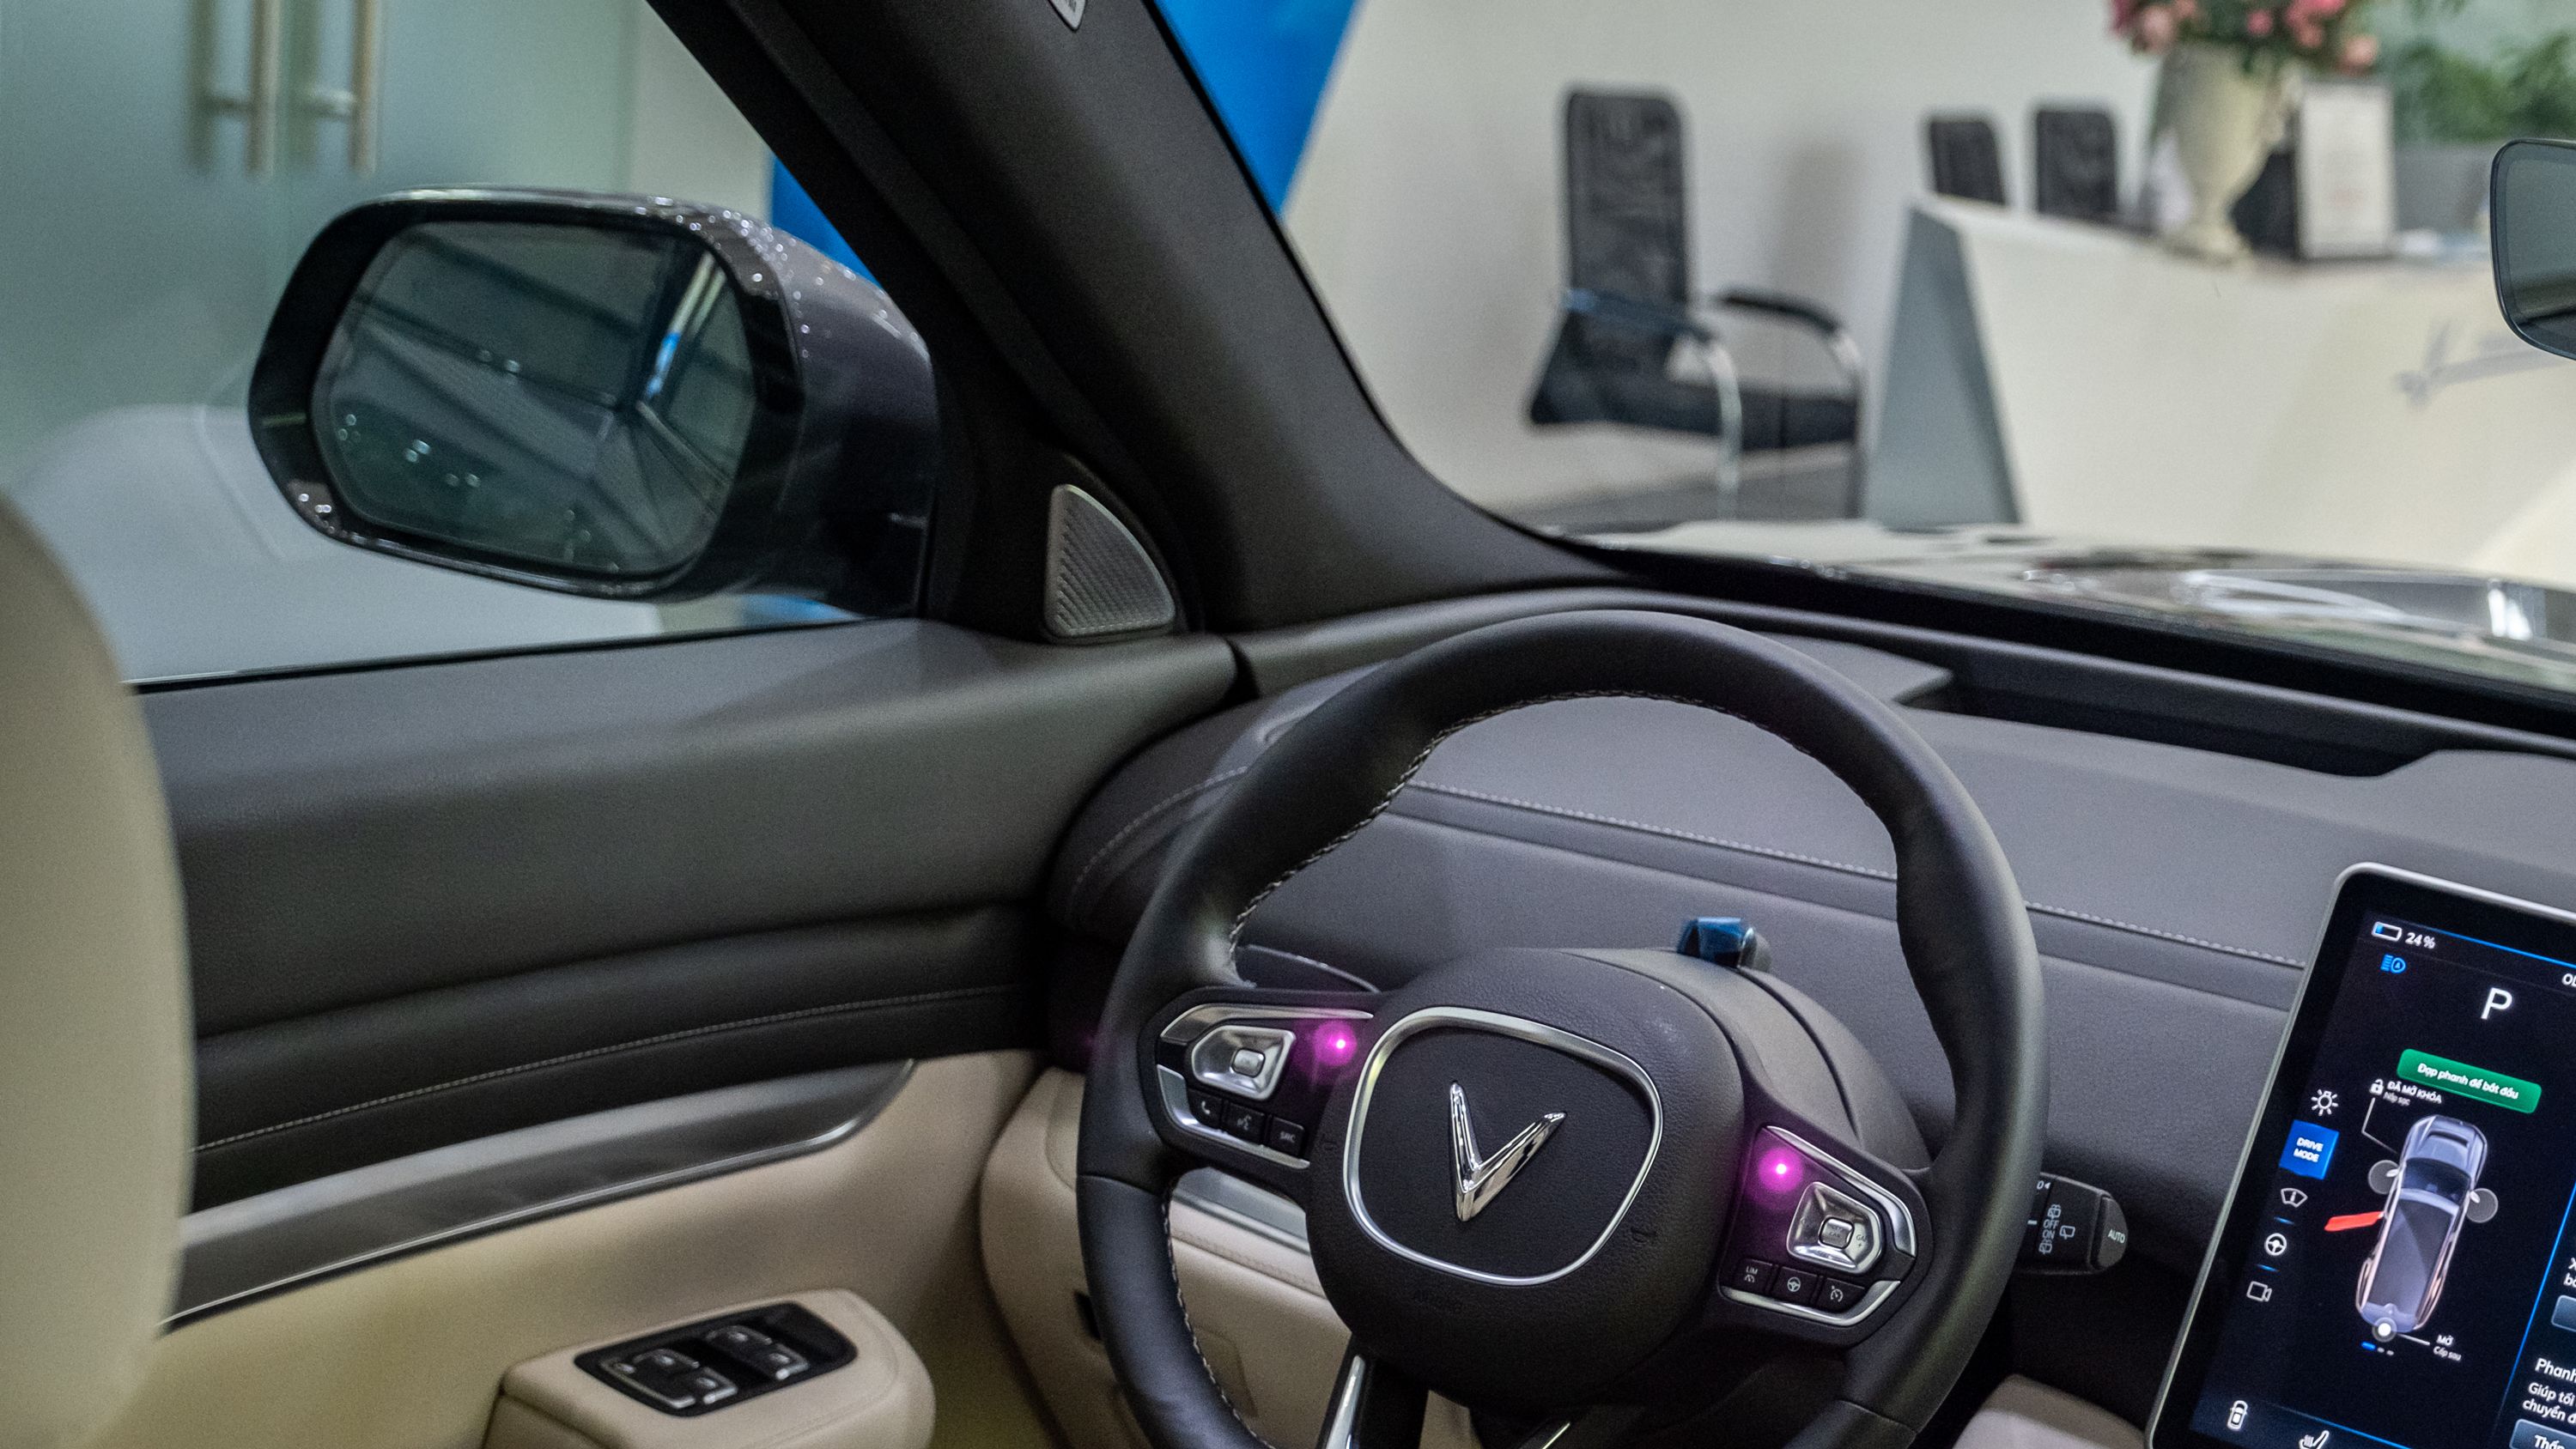 New car mirror tech means you may never have to adjust them again